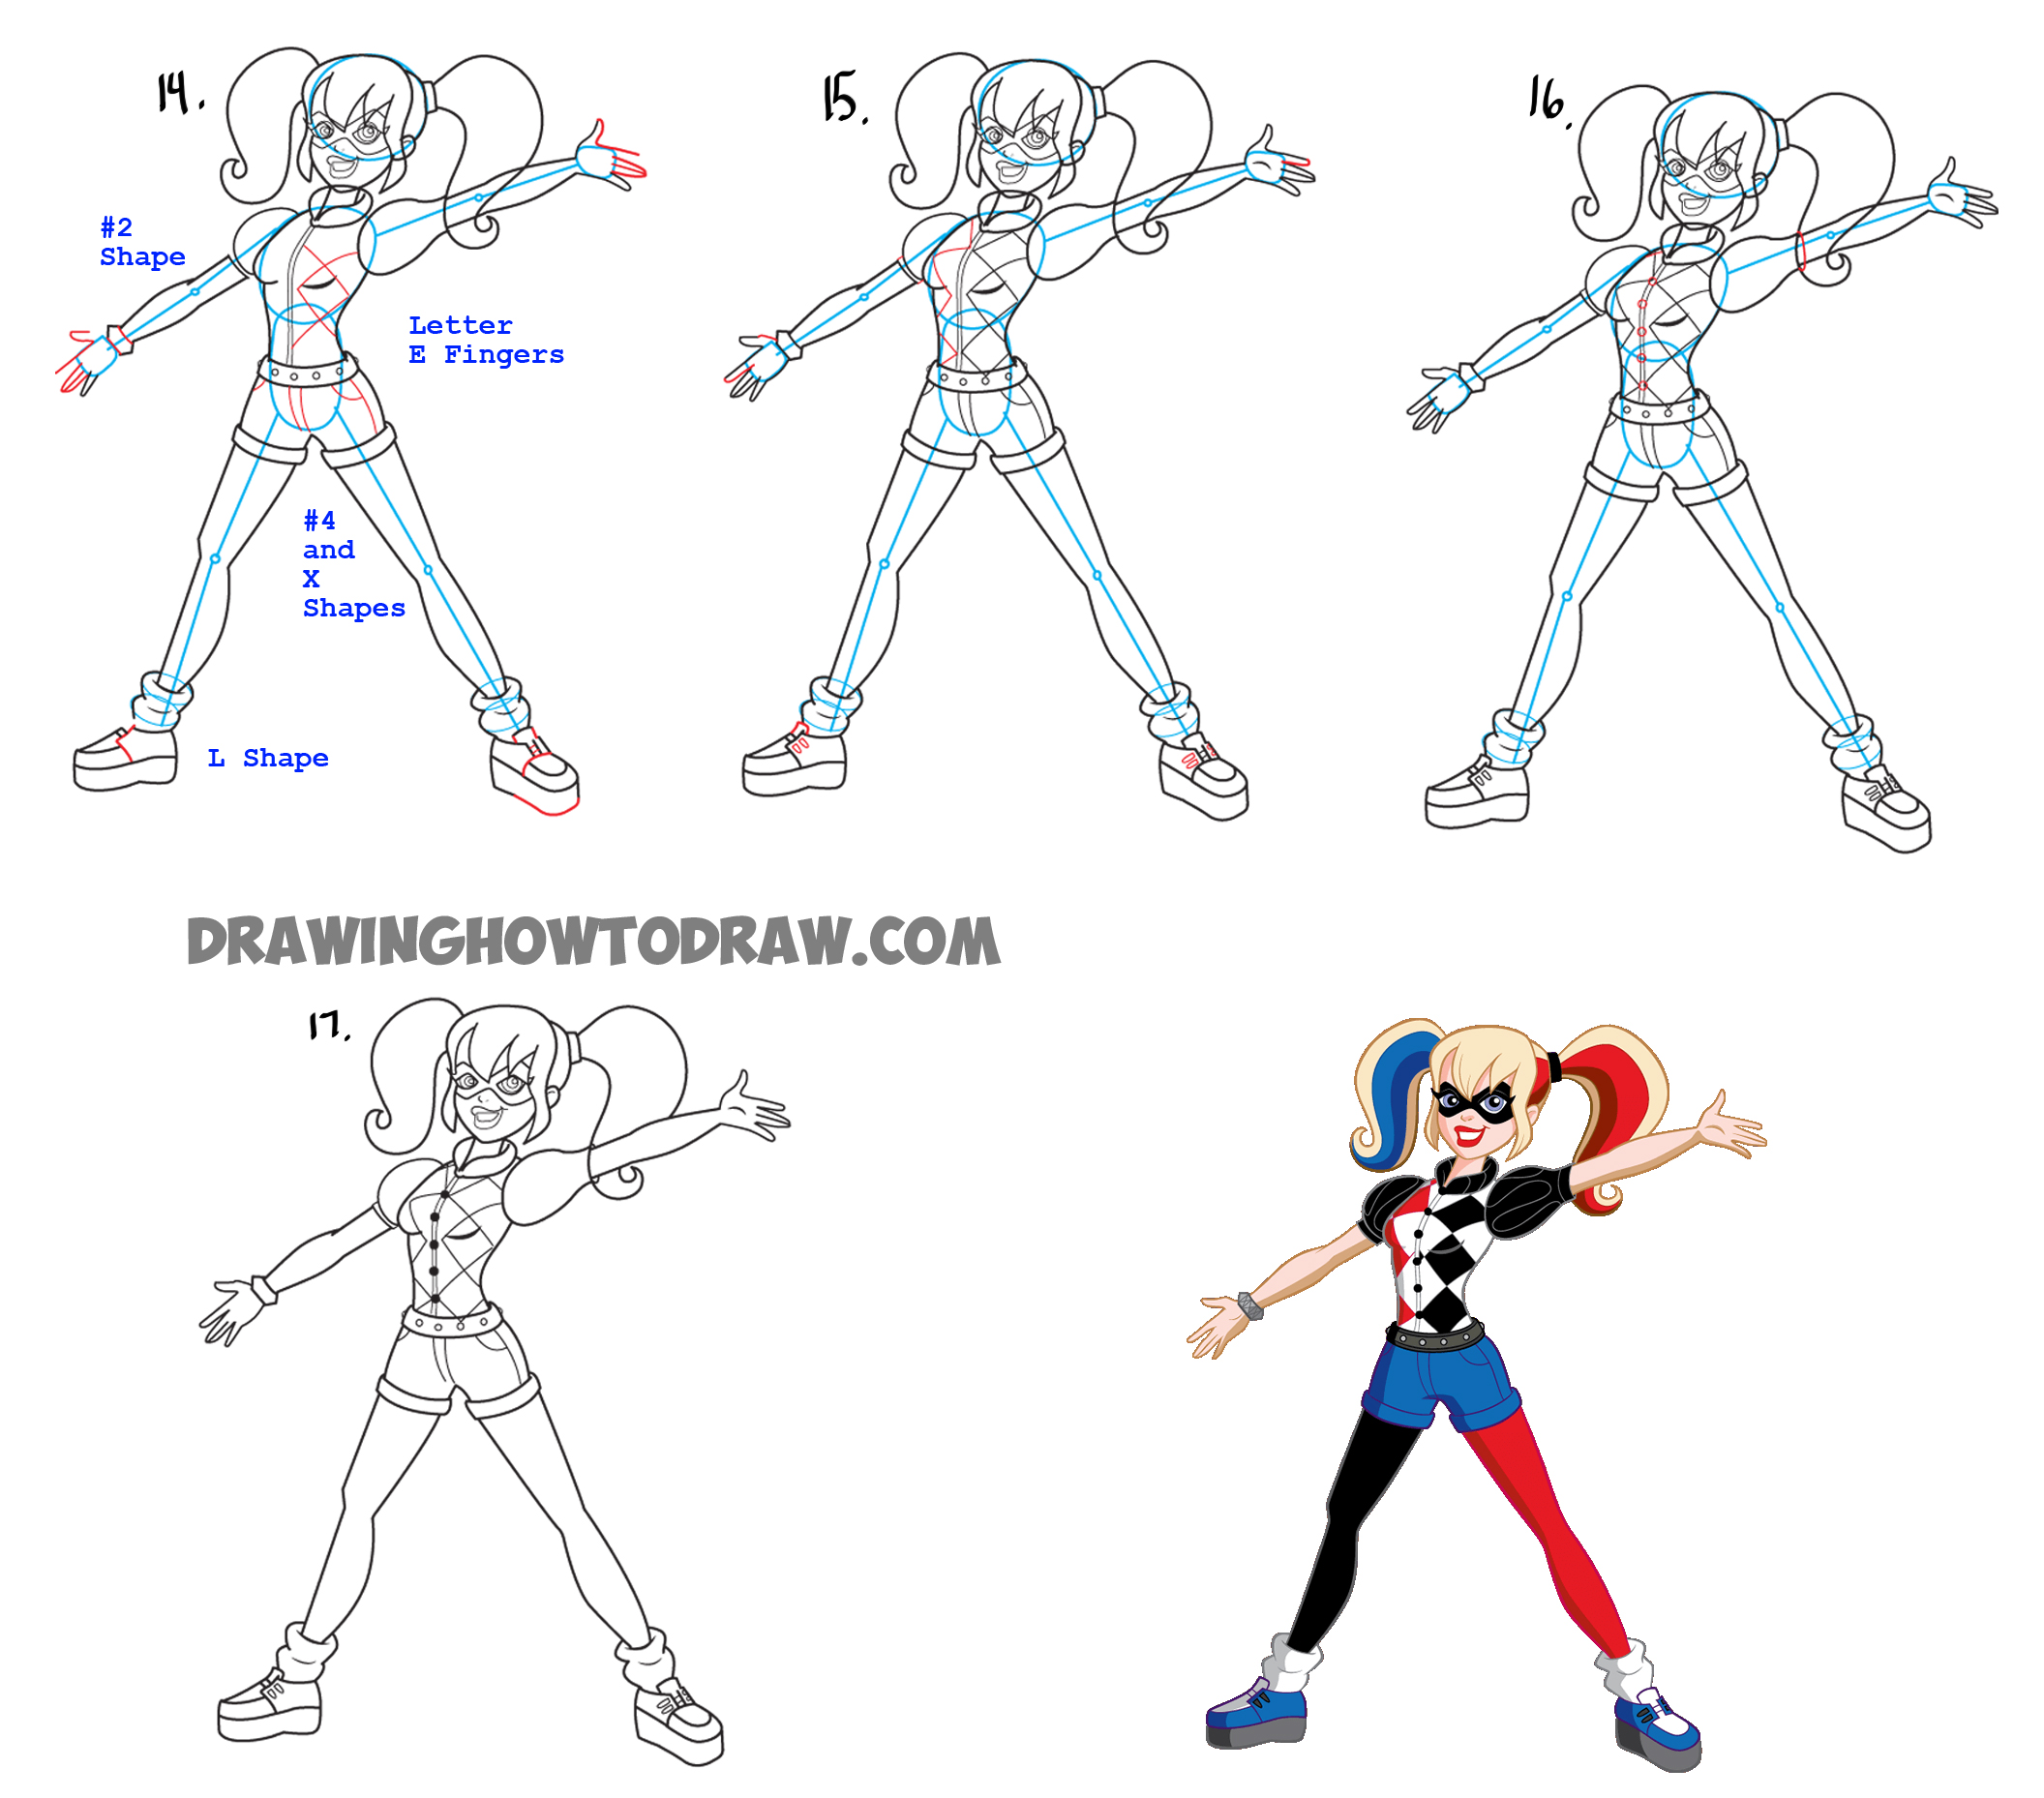 howtodraw-harley-quinn-suicide-squad-2